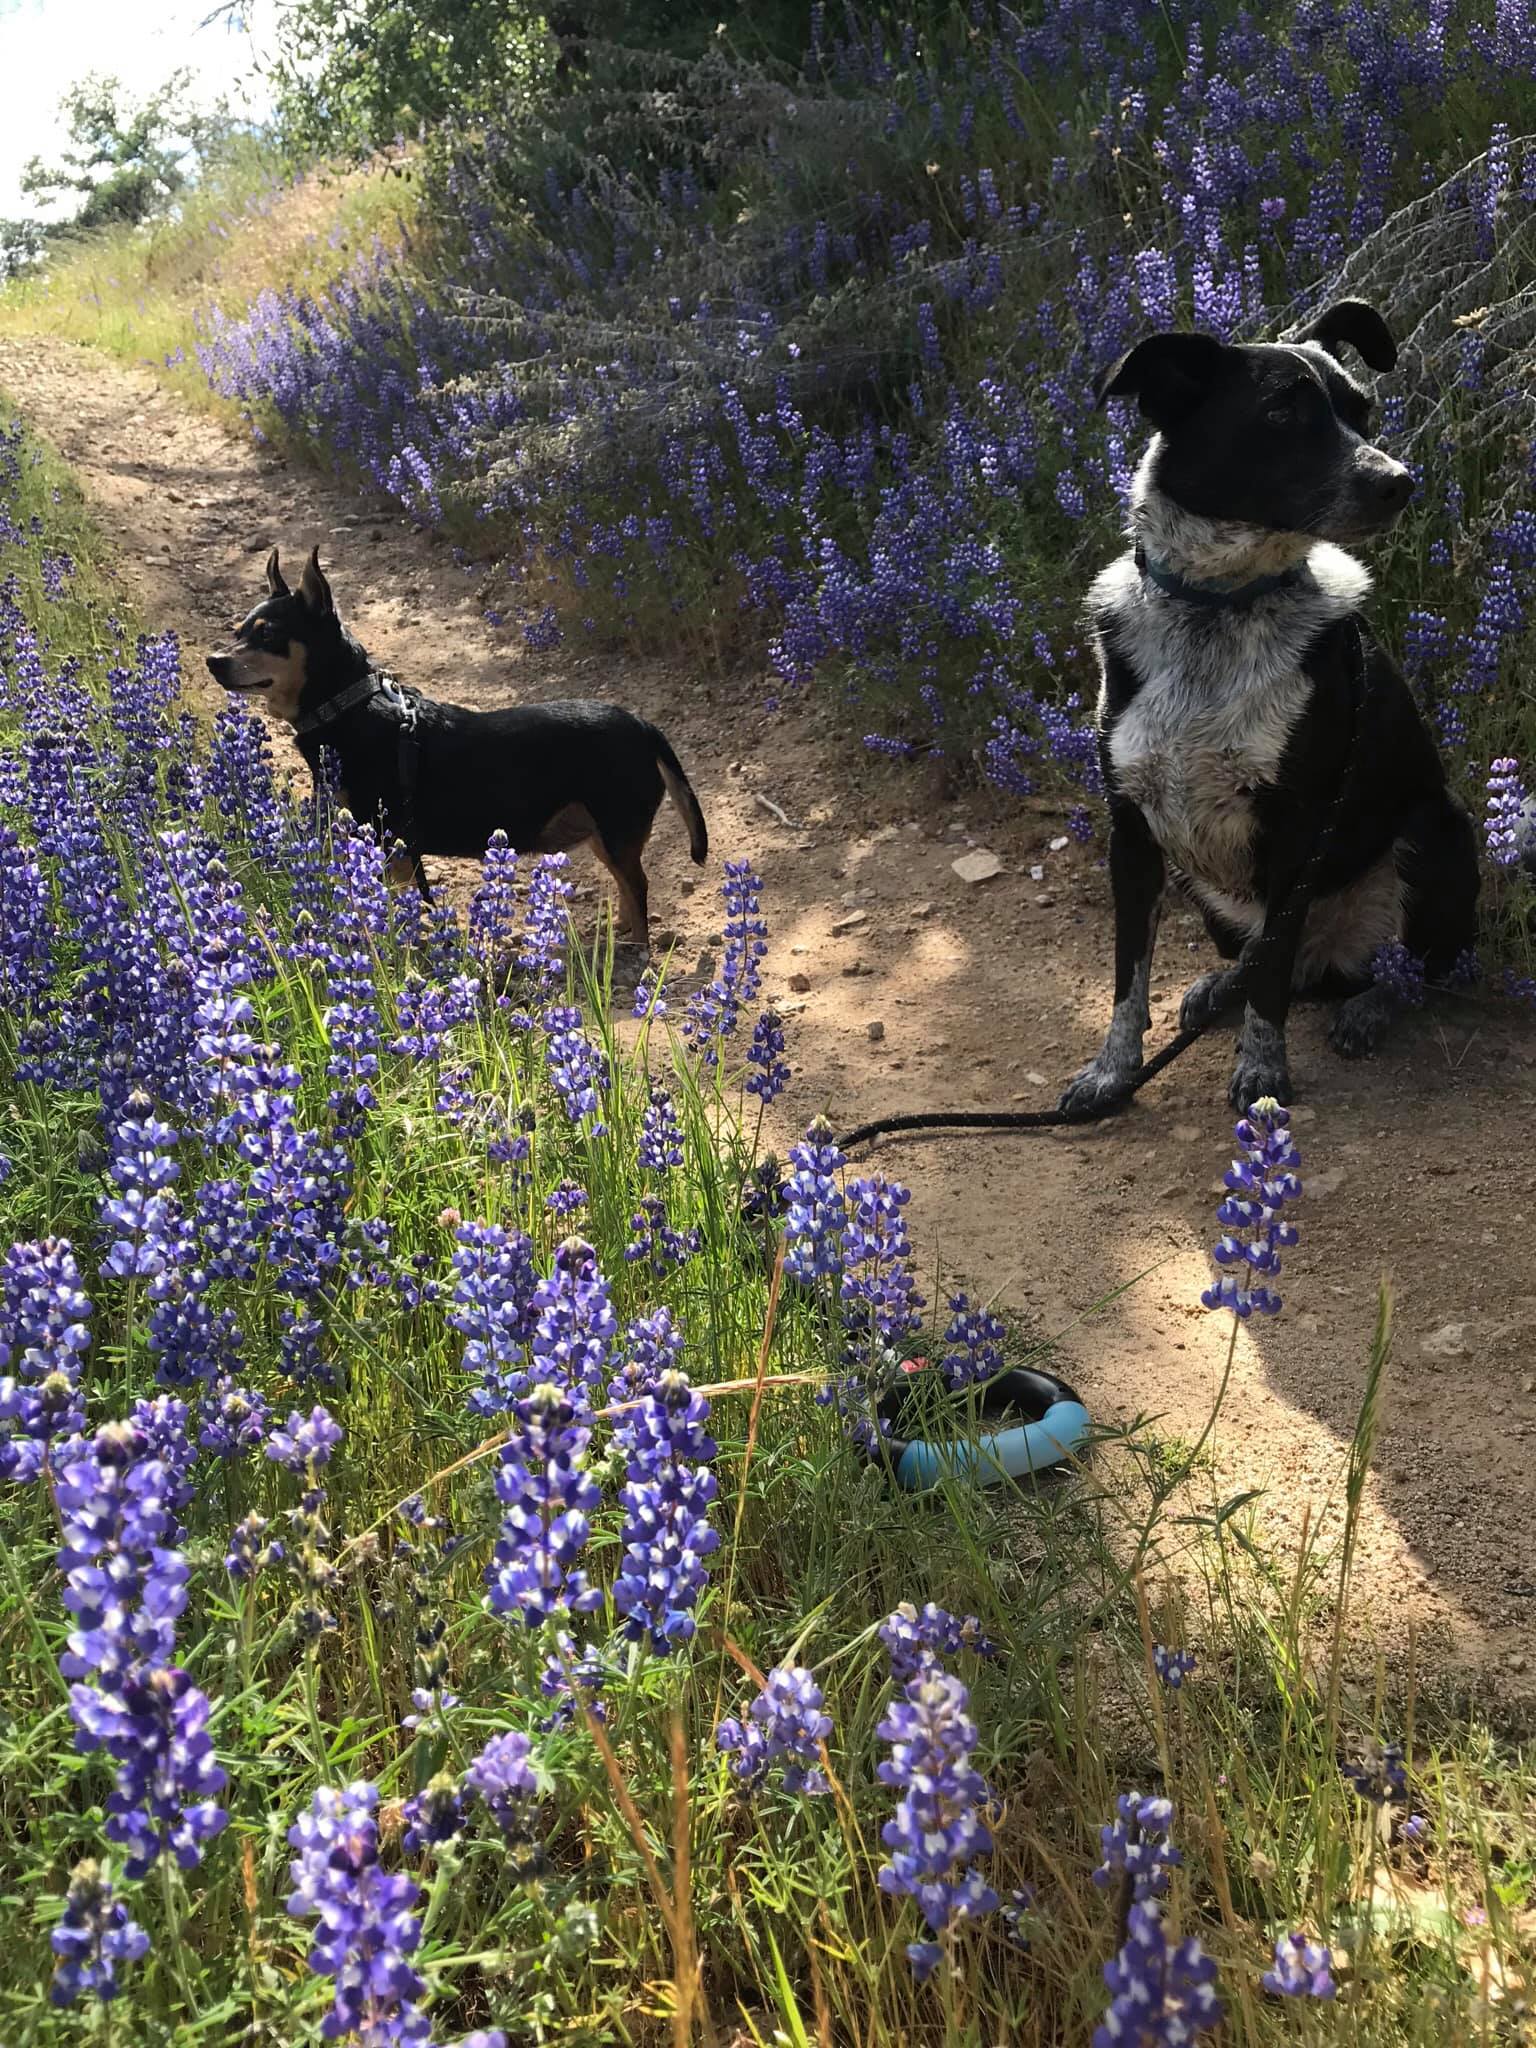 Two dogs beside each other on a trail lined with purple lupine flowers.